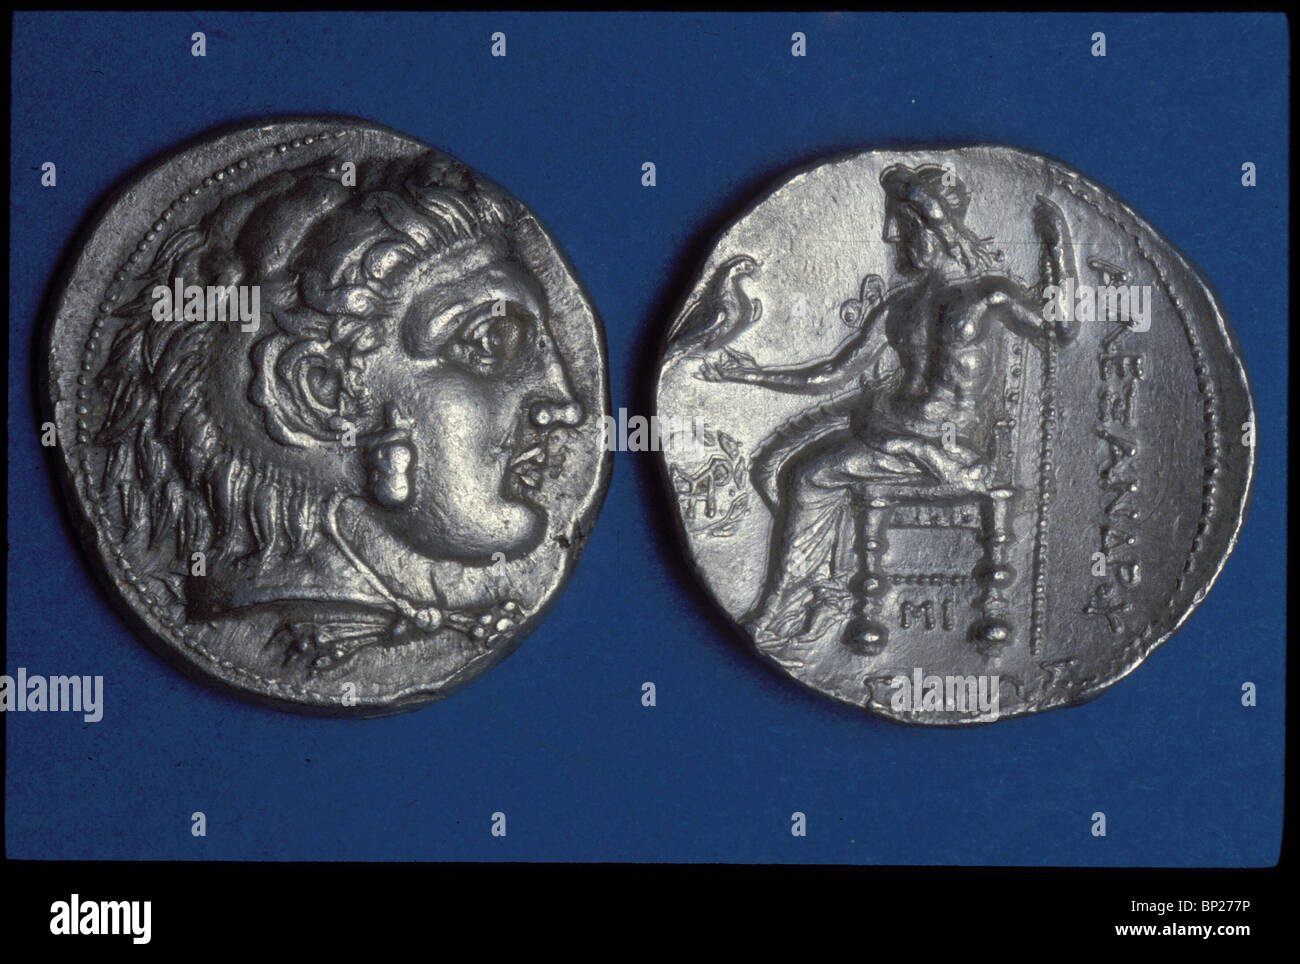 TYREAN SILVER DENAR WITH THE BUST OF ALEXANDER THE GREAT WITH A LION'S SKIN AS HEADDRESS obverse: ZEUS SEATED ON A THRONE Stock Photo